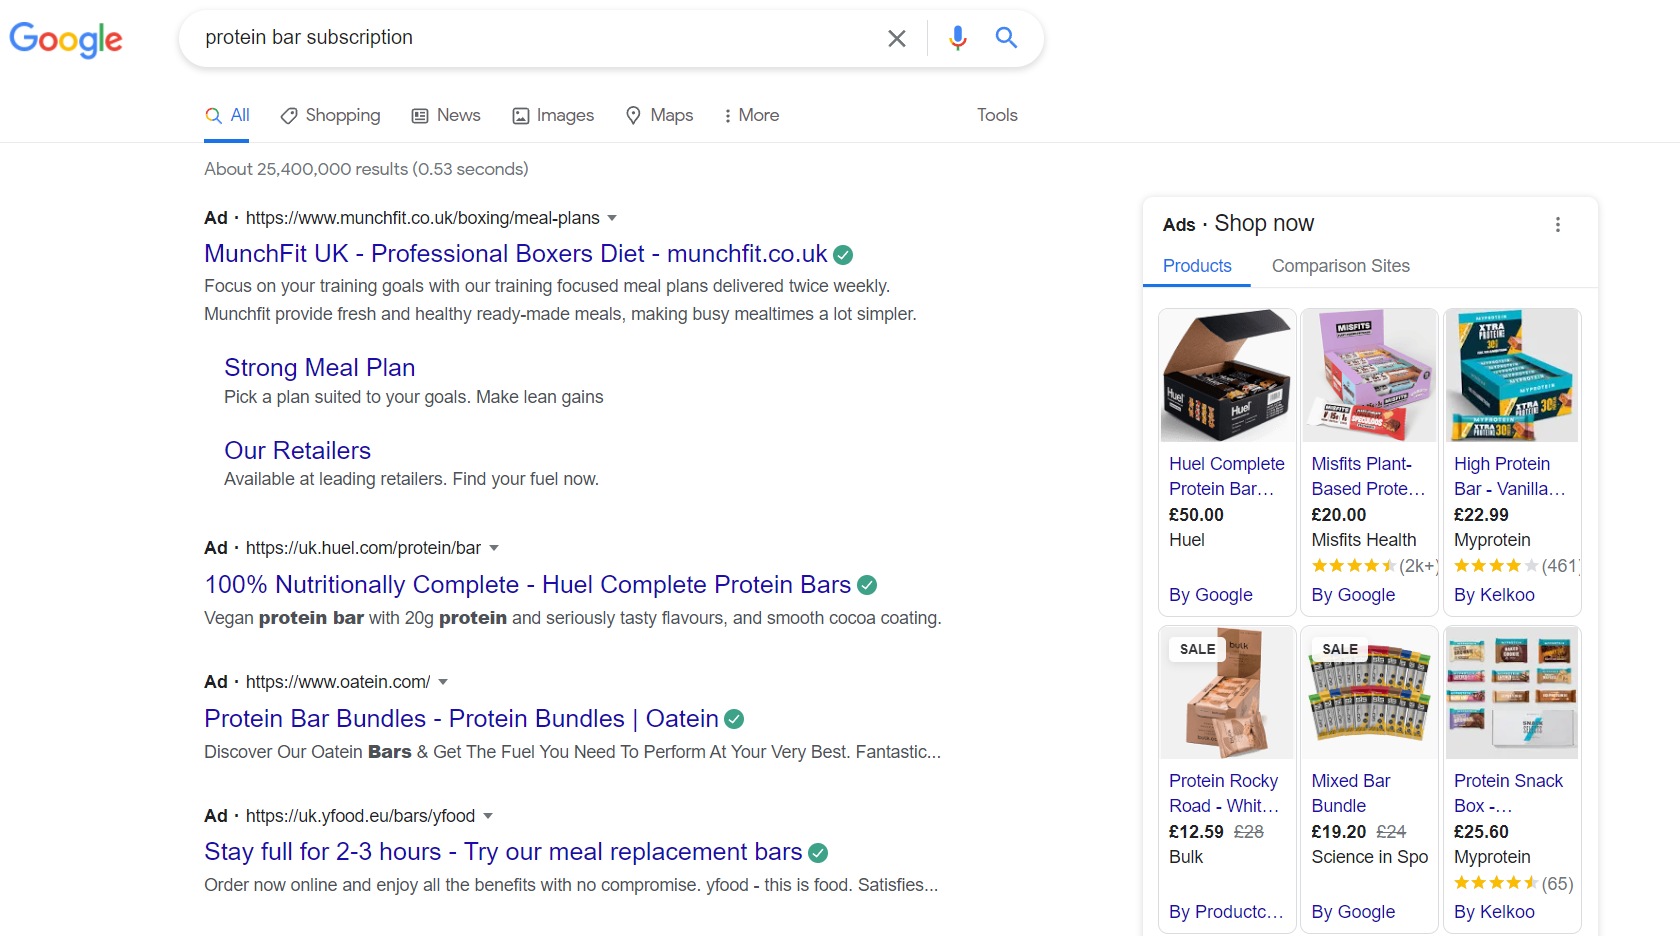 Protein bar subscription serp results image